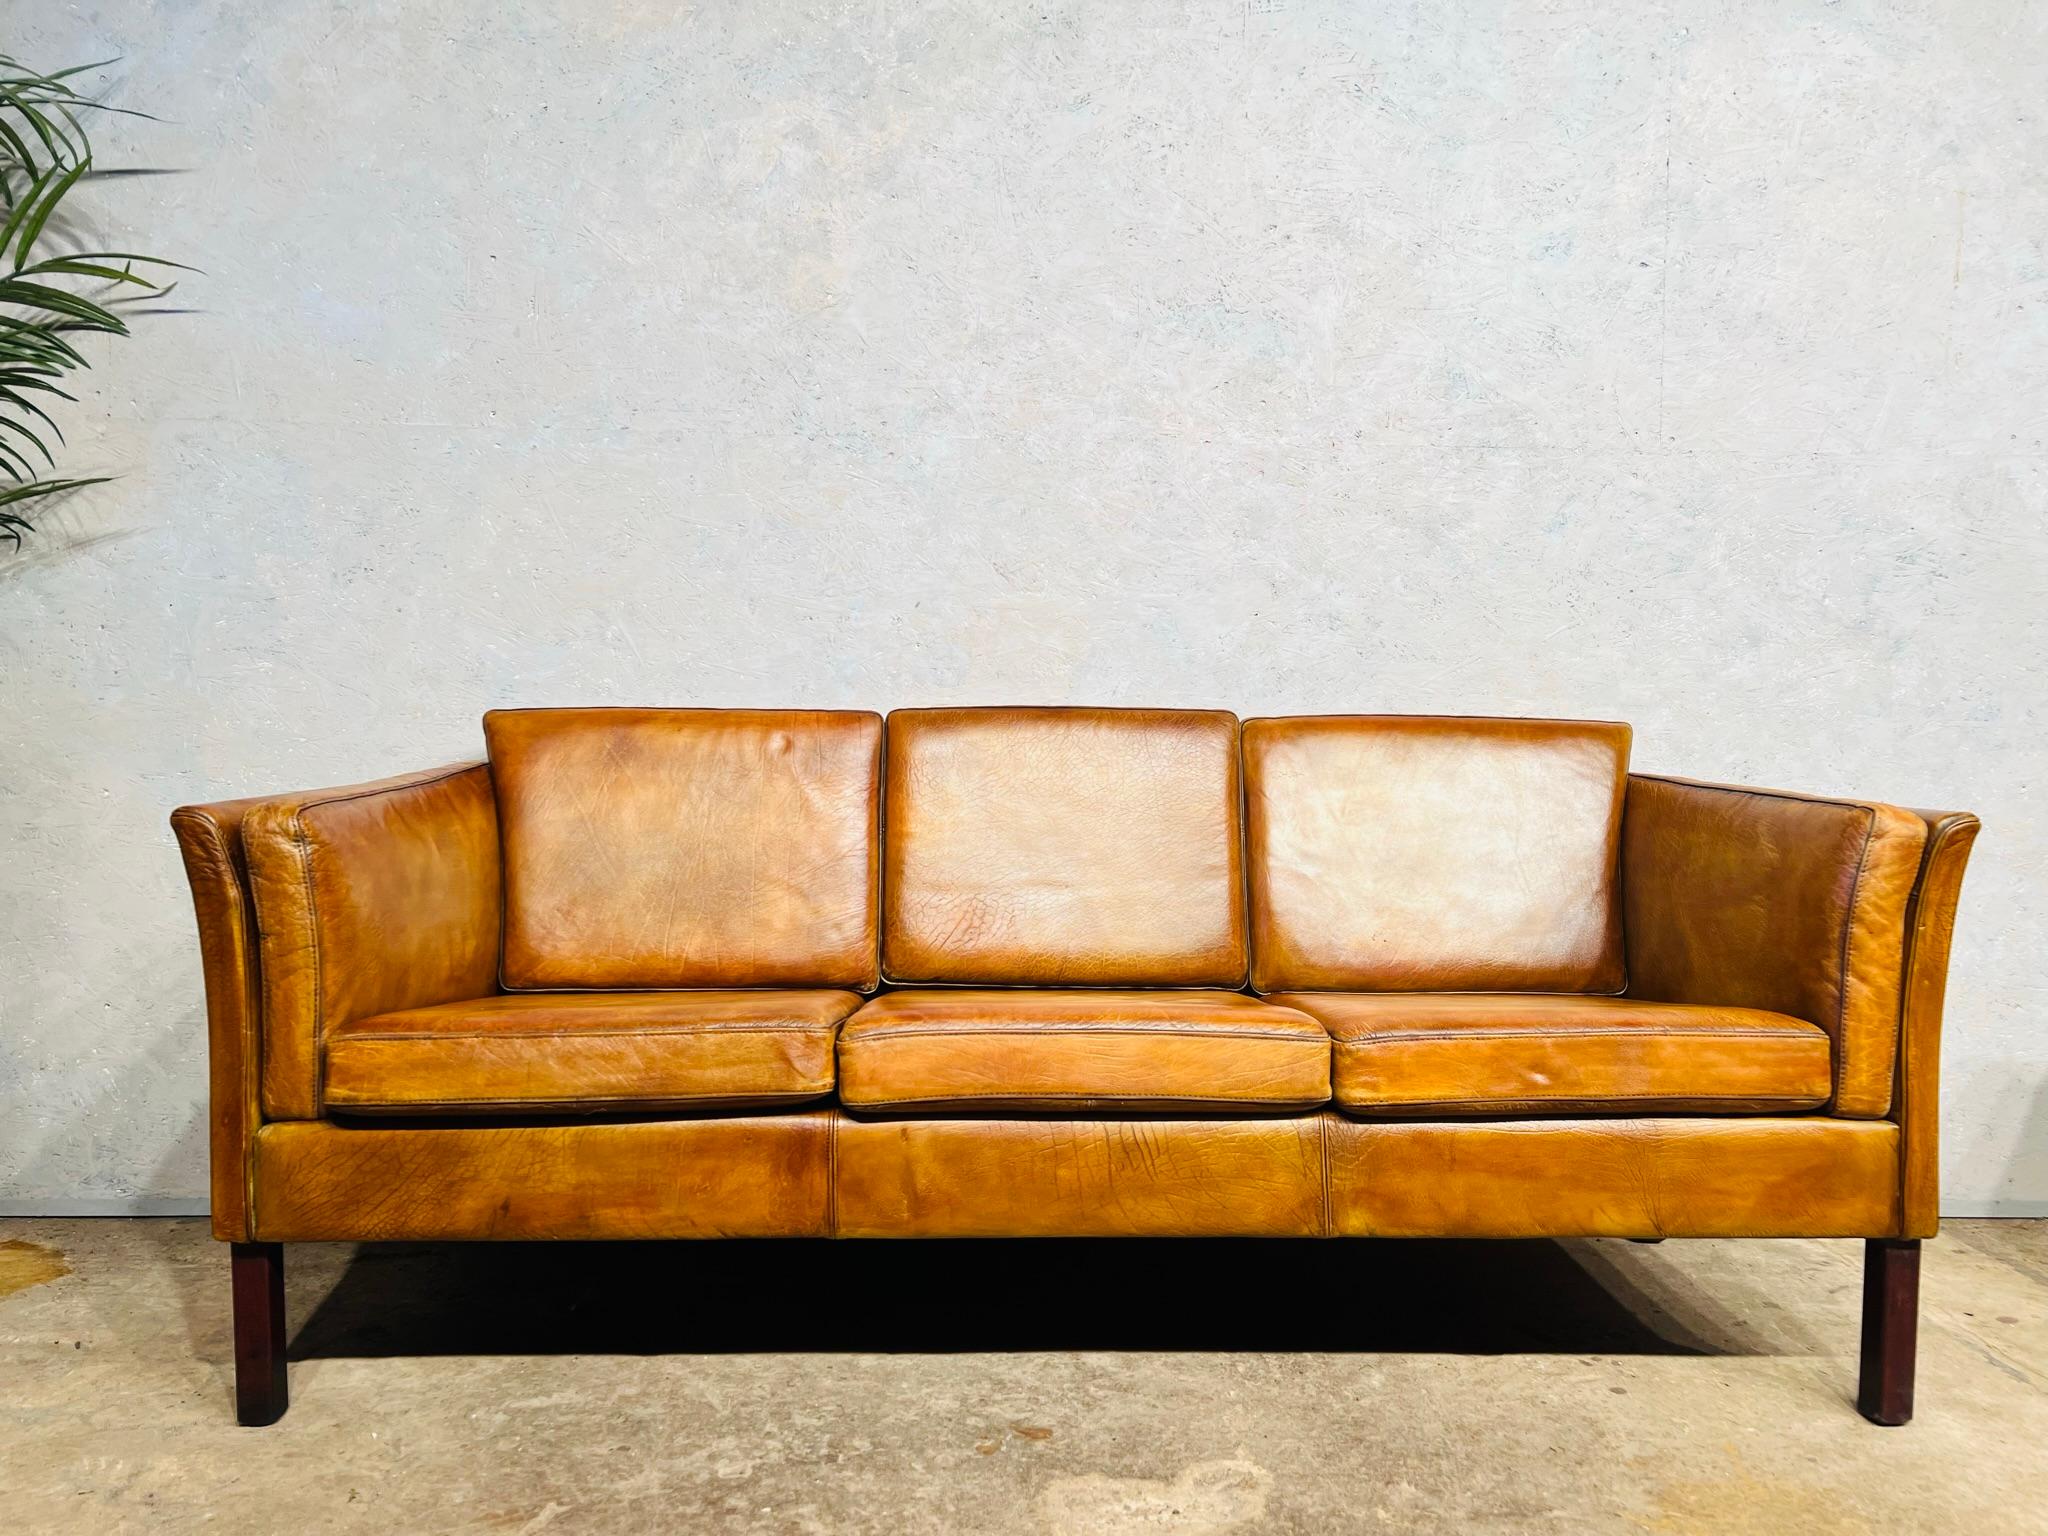 Vintage 1970s Patinated Light Tan 3 Seater Leather Sofa In Good Condition For Sale In Lewes, GB